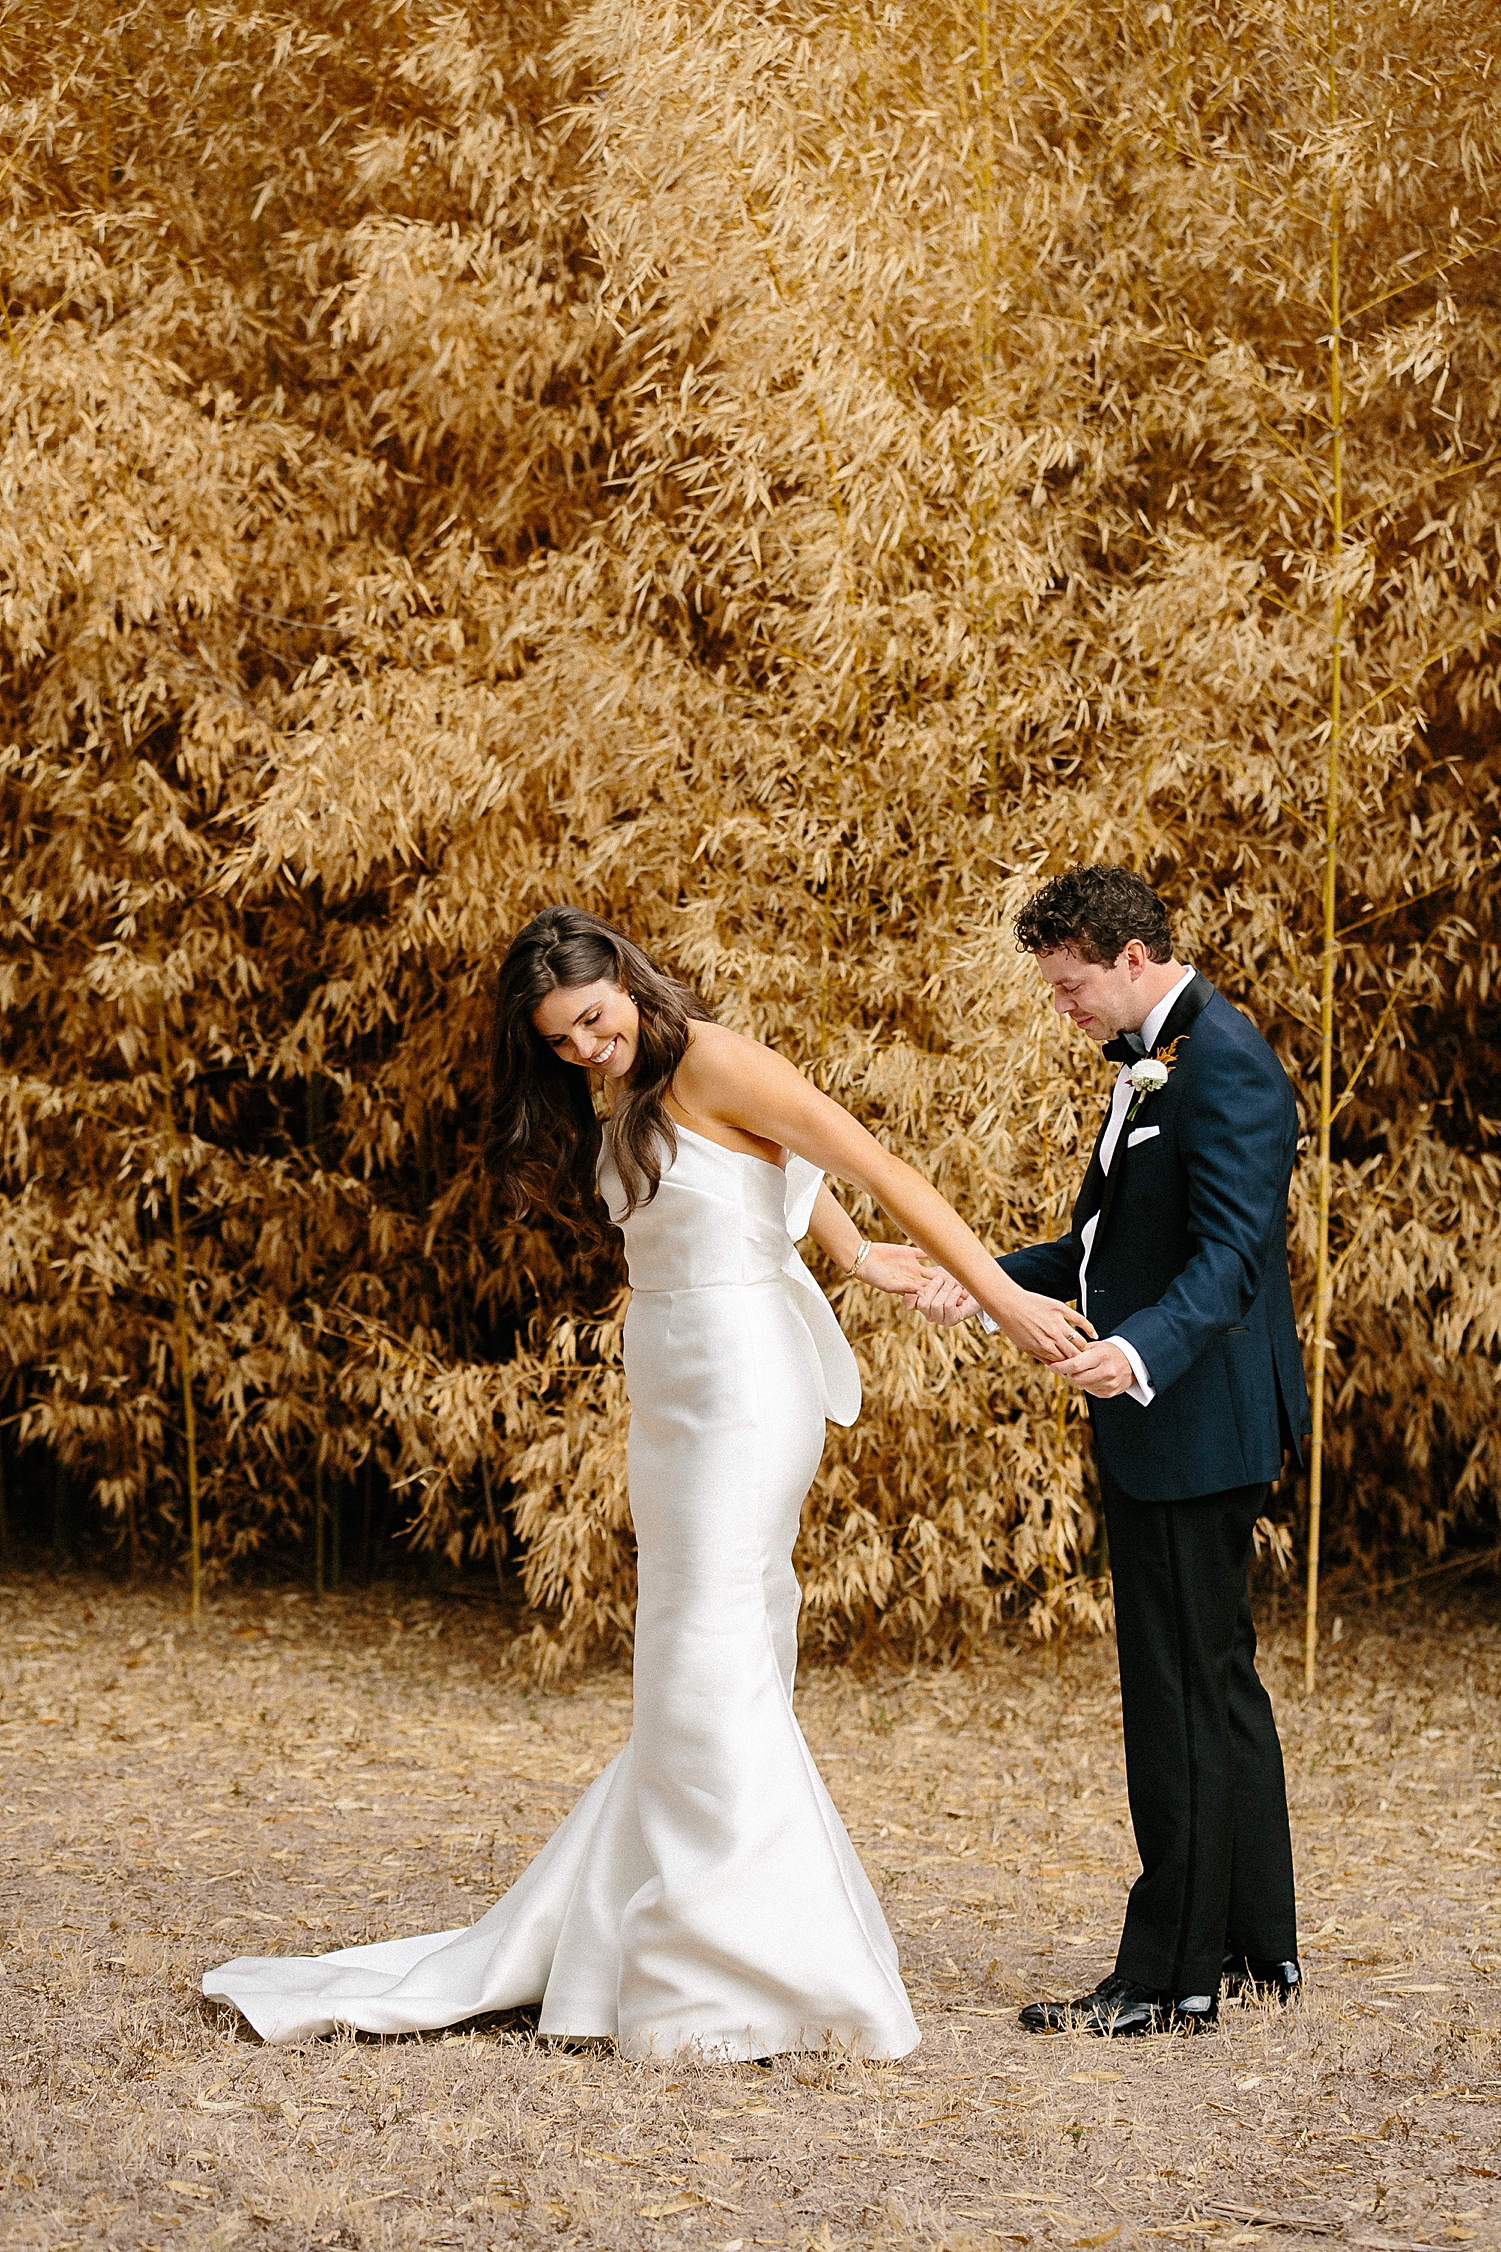 bride and groom seeing each other wedding first look reaction in front of golden plants Matties 